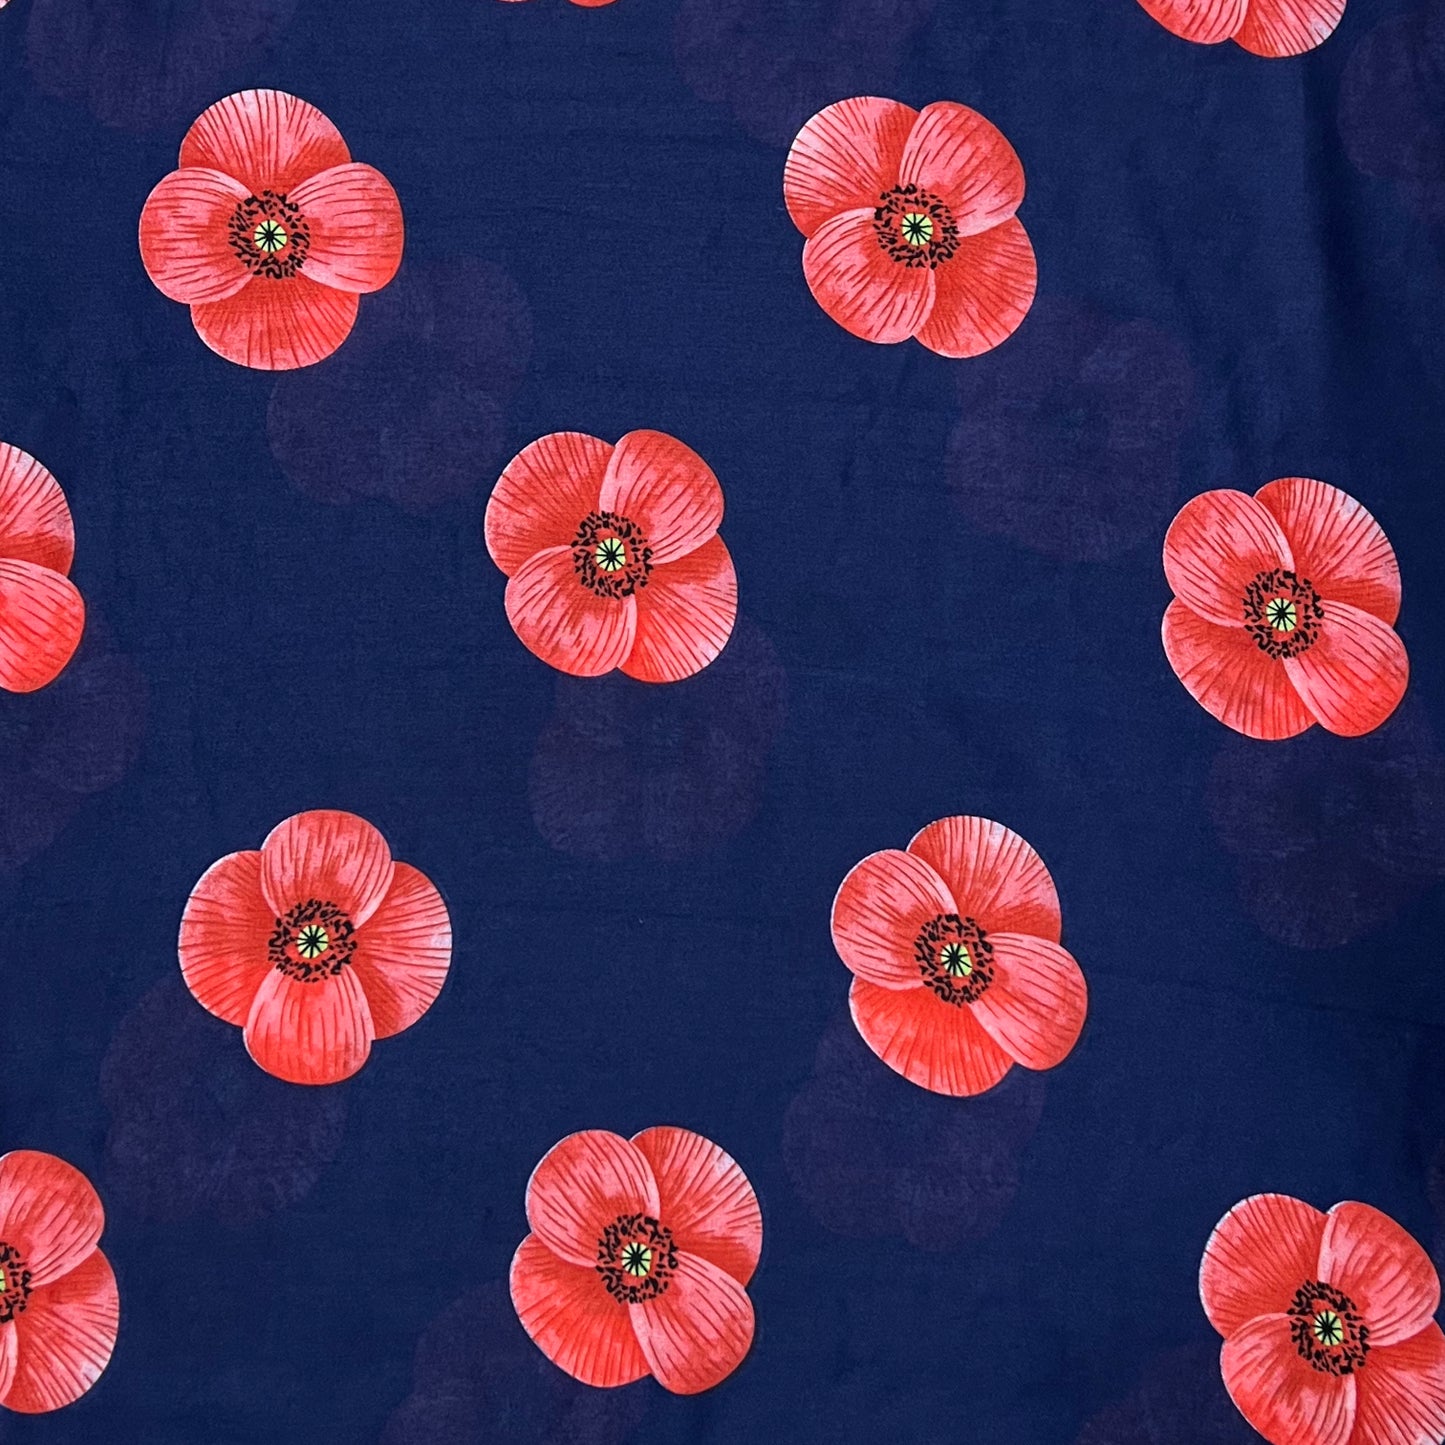 Wrap up in style with this elegant supersoft poppy print scarf. Crafted from a cotton mix fabric in a navy color, accessorize any outfit to create a look that is both stylish and timeless.  L:180cm x W: 90cm 50% Cotton and 50% Viscose